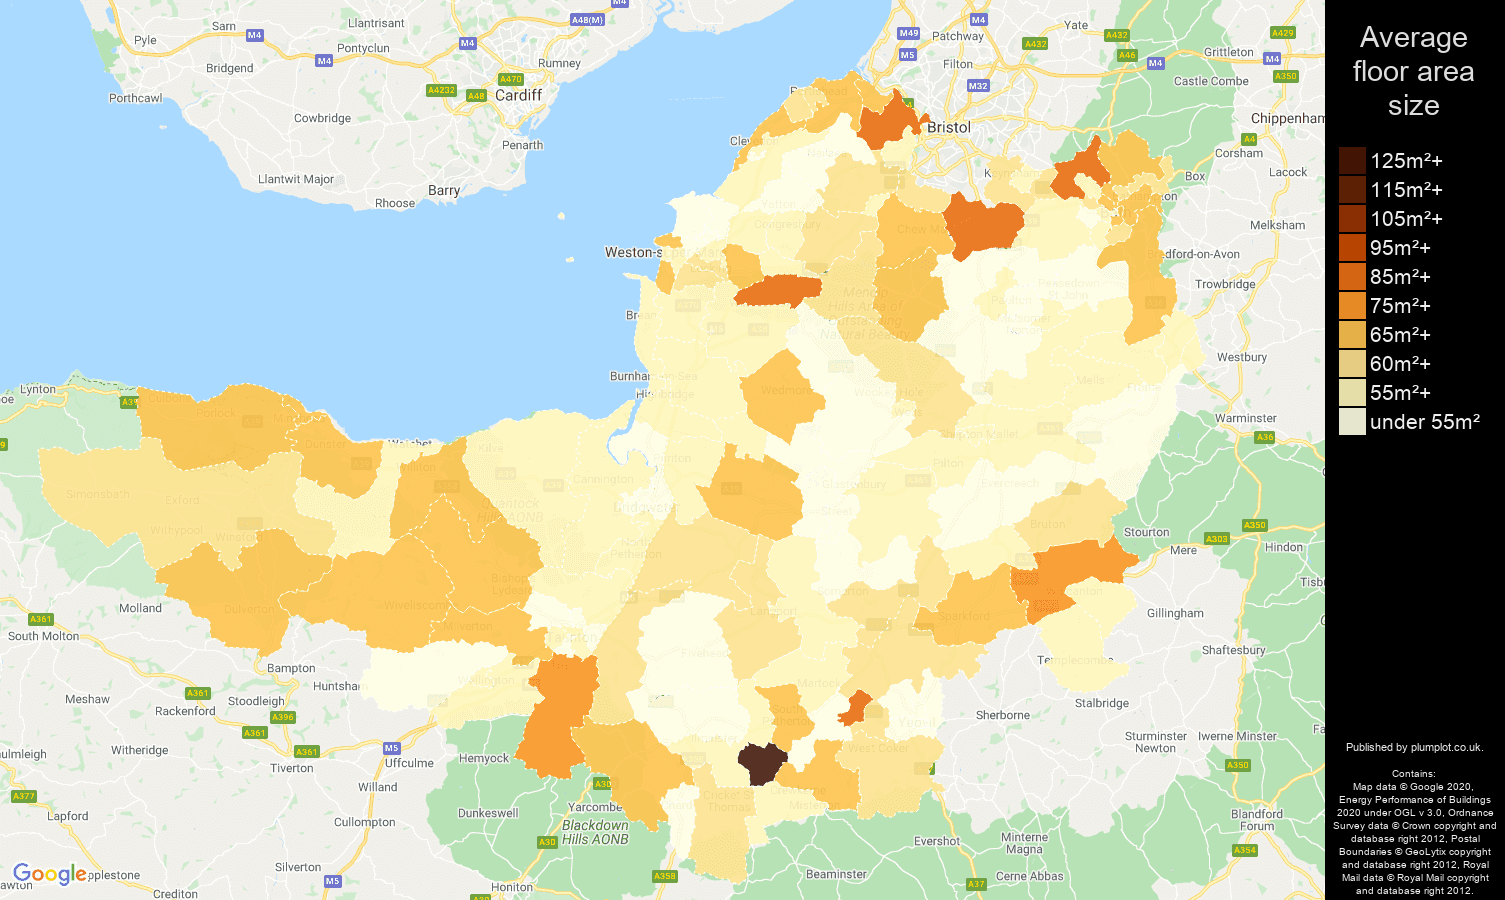 Somerset map of average floor area size of flats